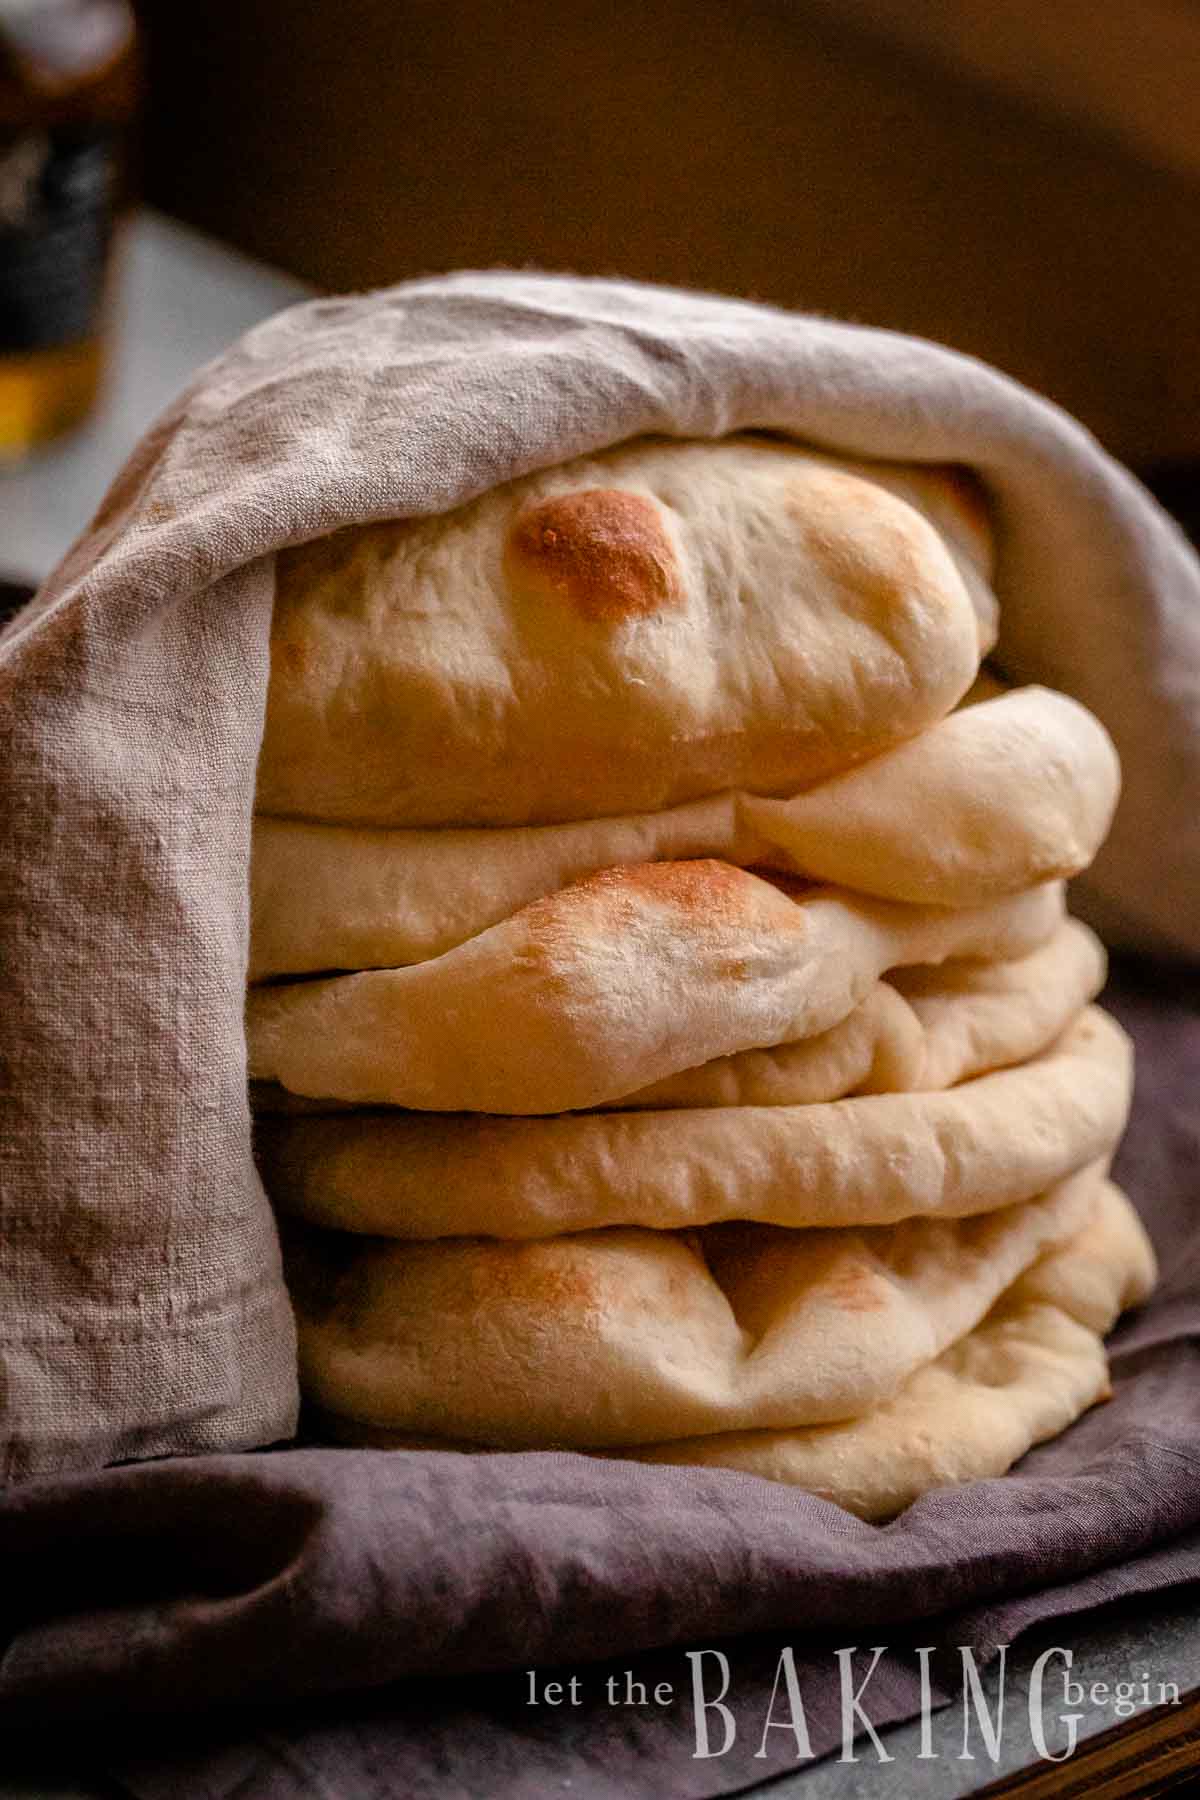 https://letthebakingbegin.com/wp-content/uploads/2020/01/Pita-Bread-Recipe-is-the-one-that-YOU-can-make-at-home.-10.jpg